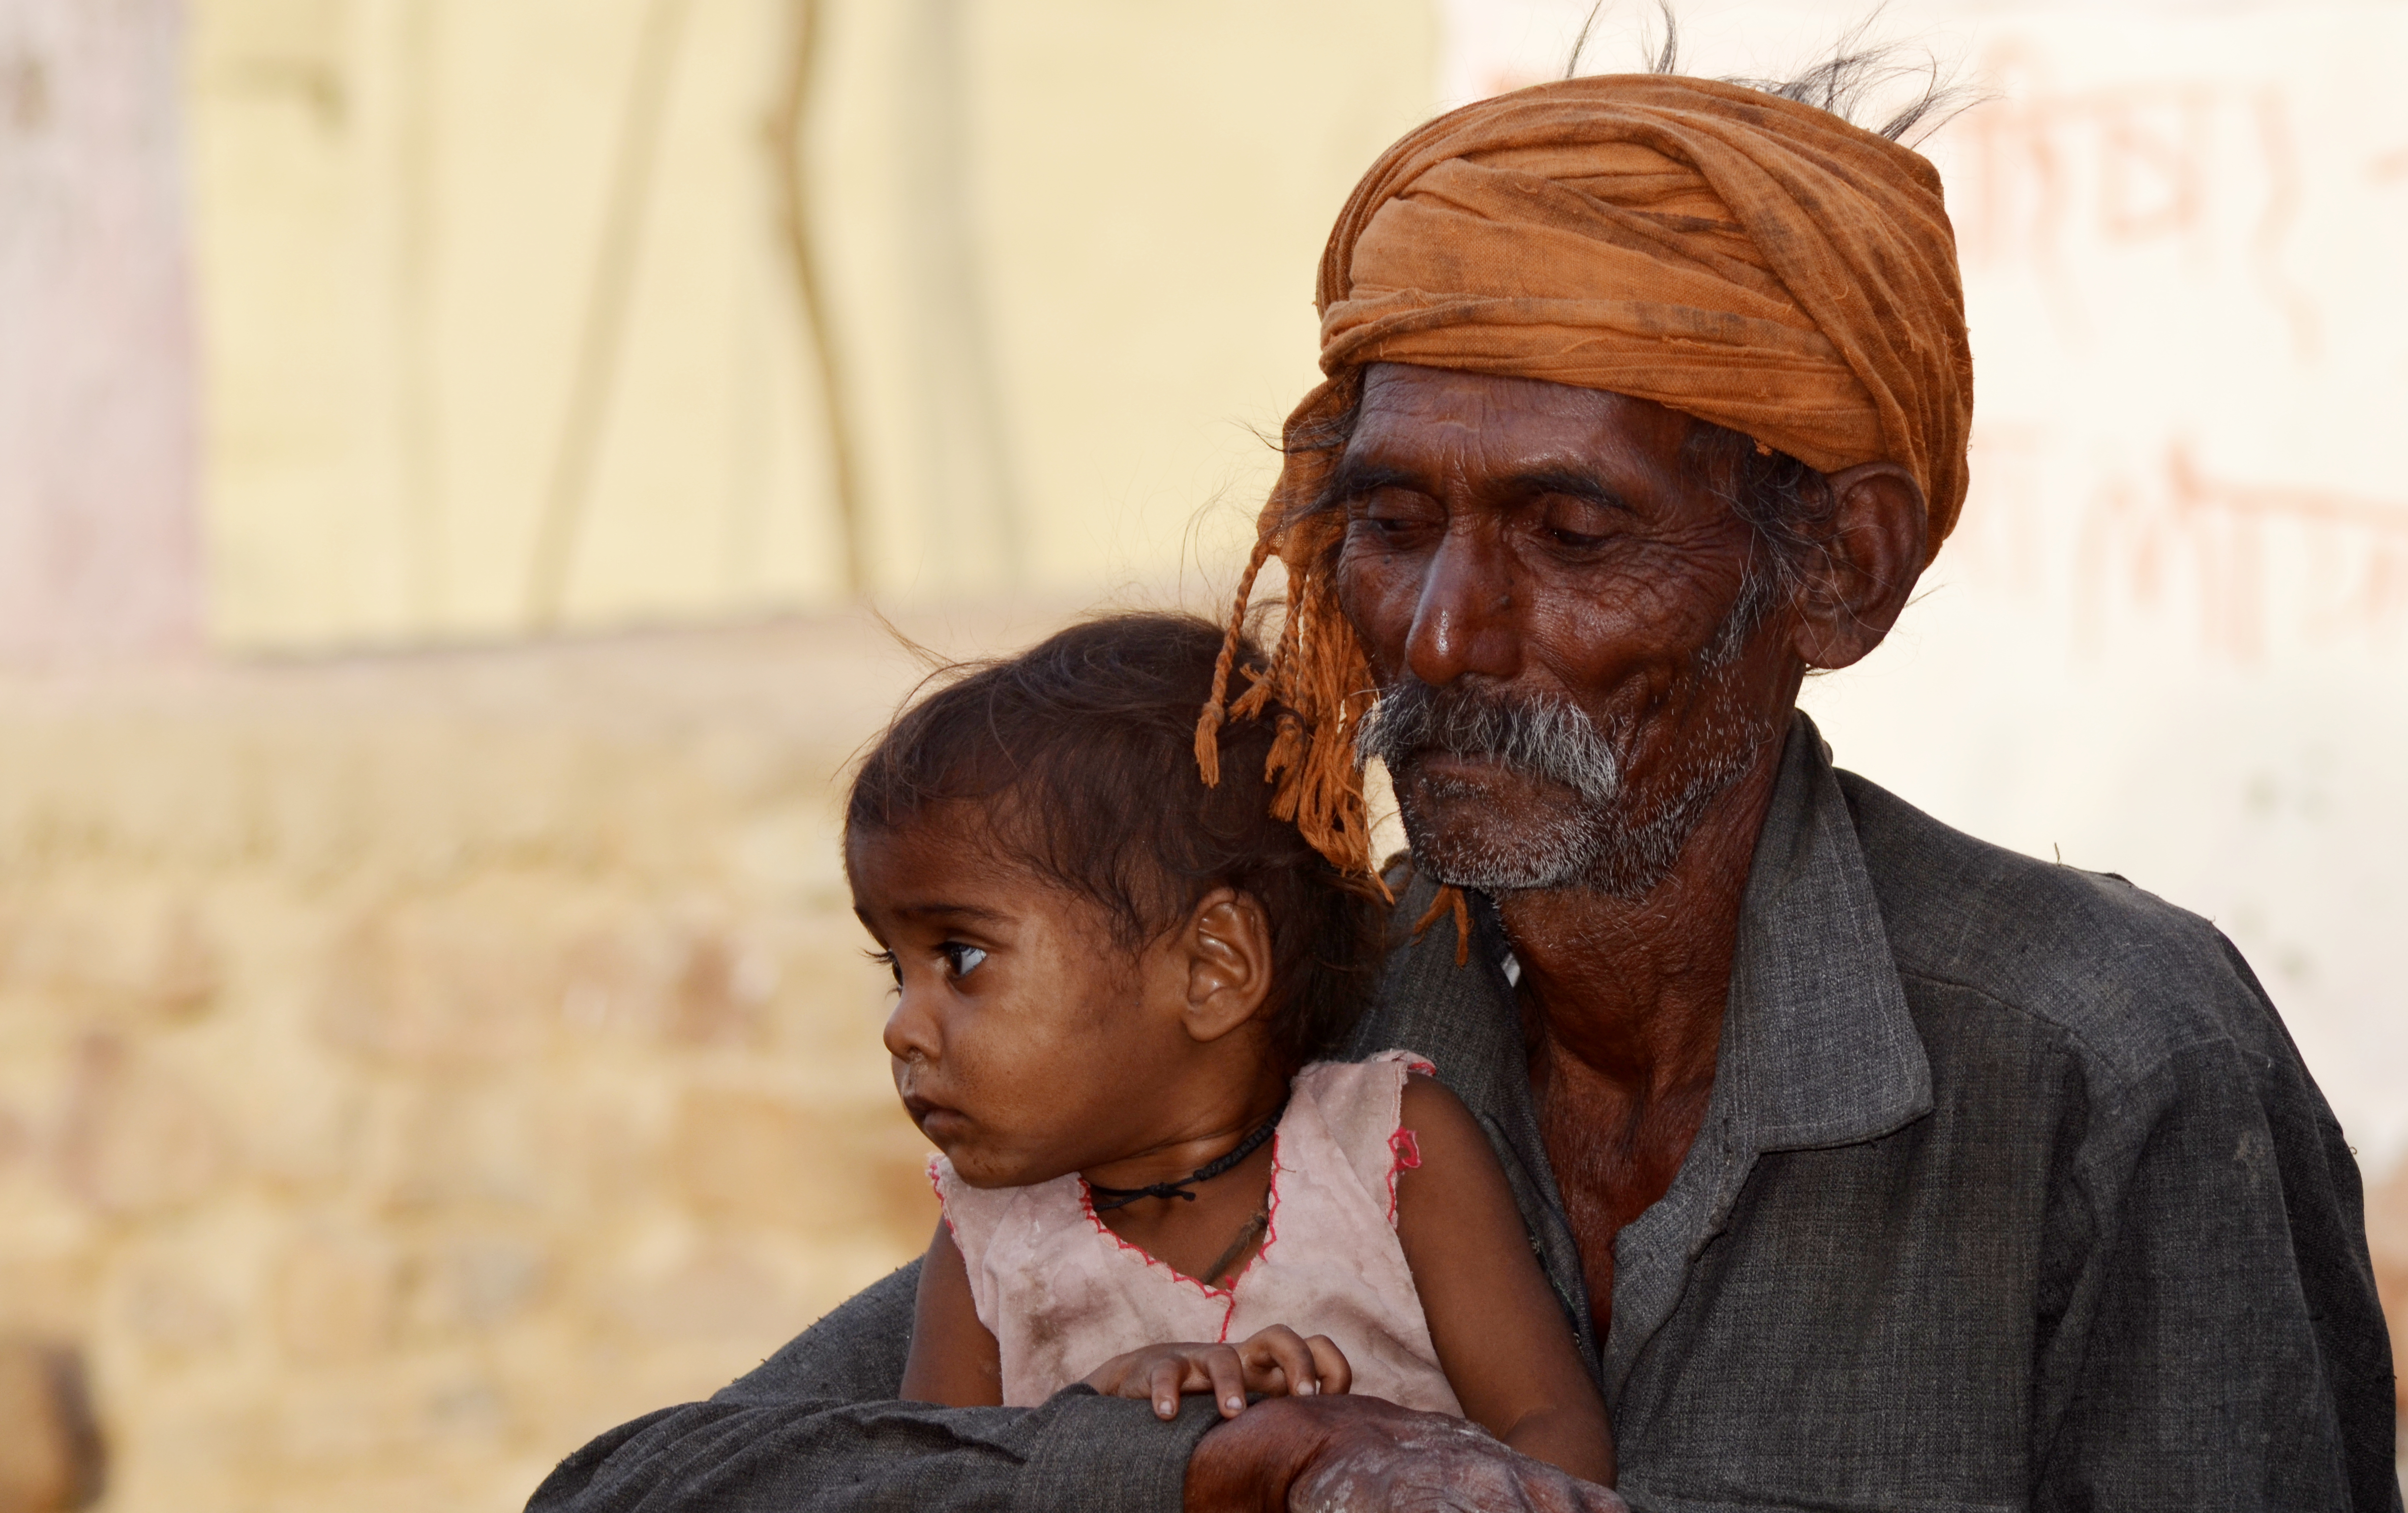 Old man with a baby girl, Morena district